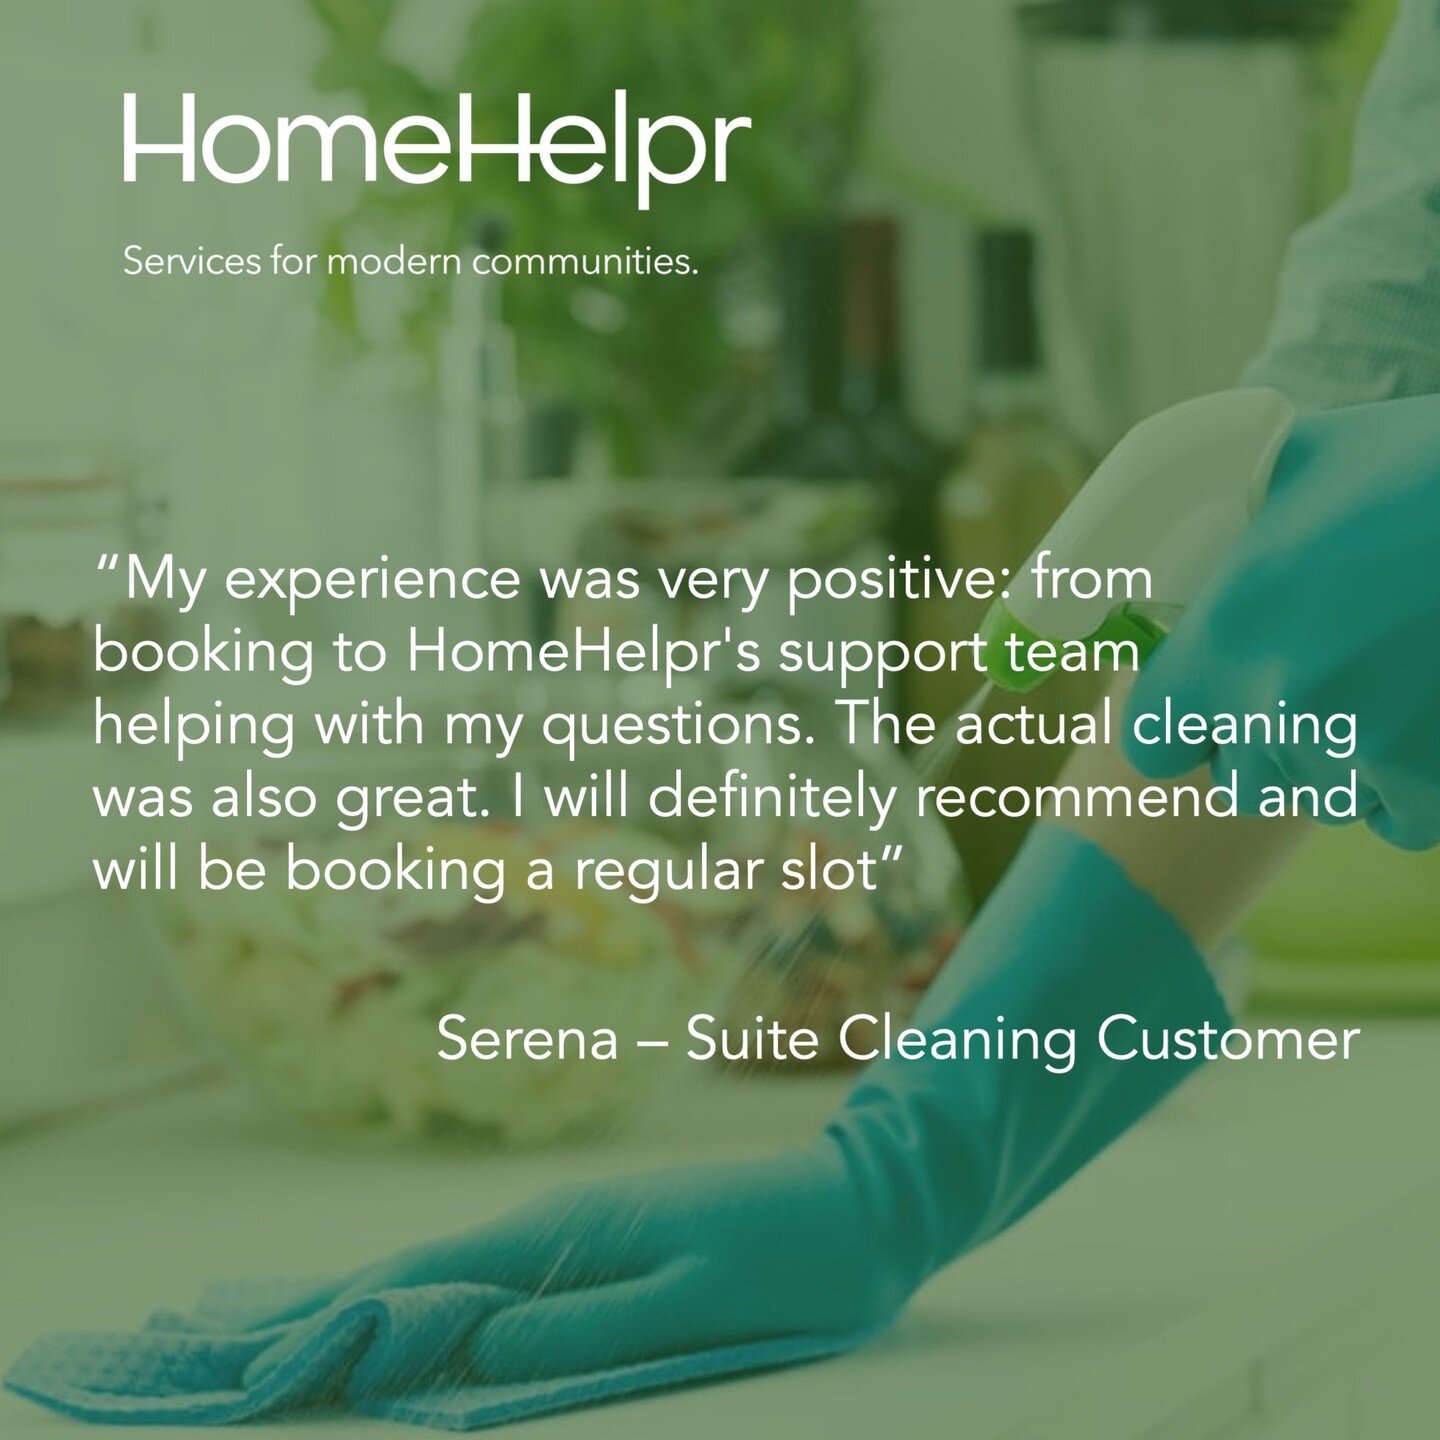 We love hearing from our happy customers. Spring is in the air and there has been a lot of demand for cleaning services. If you need some help - let us know! #mobileservice #Toronto

#torontorentals #Toronto #WeTheNorth #OurMoment #canada #lovetoront